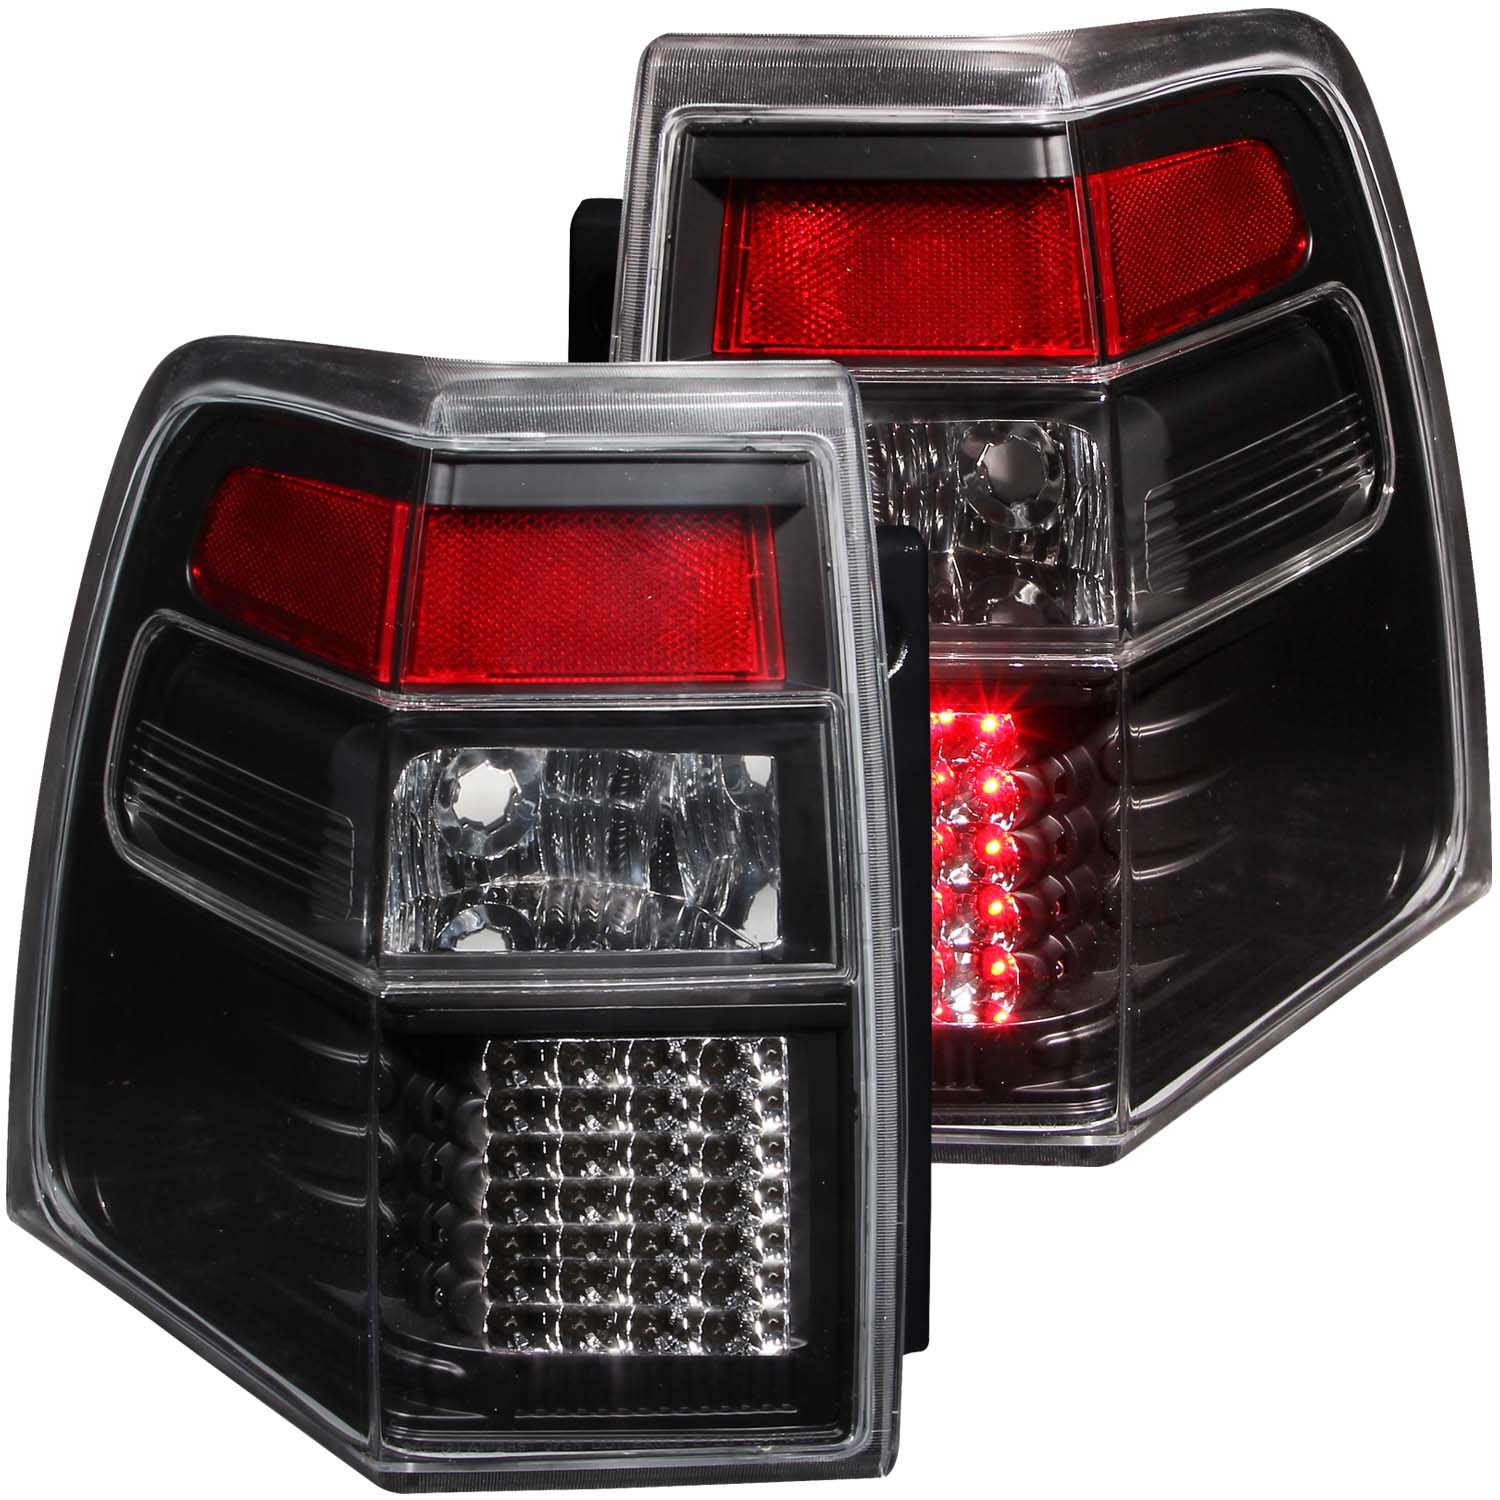 Anzo USA Anzo USA 311110 Tail Light Assembly Fits 07-14 Expedition